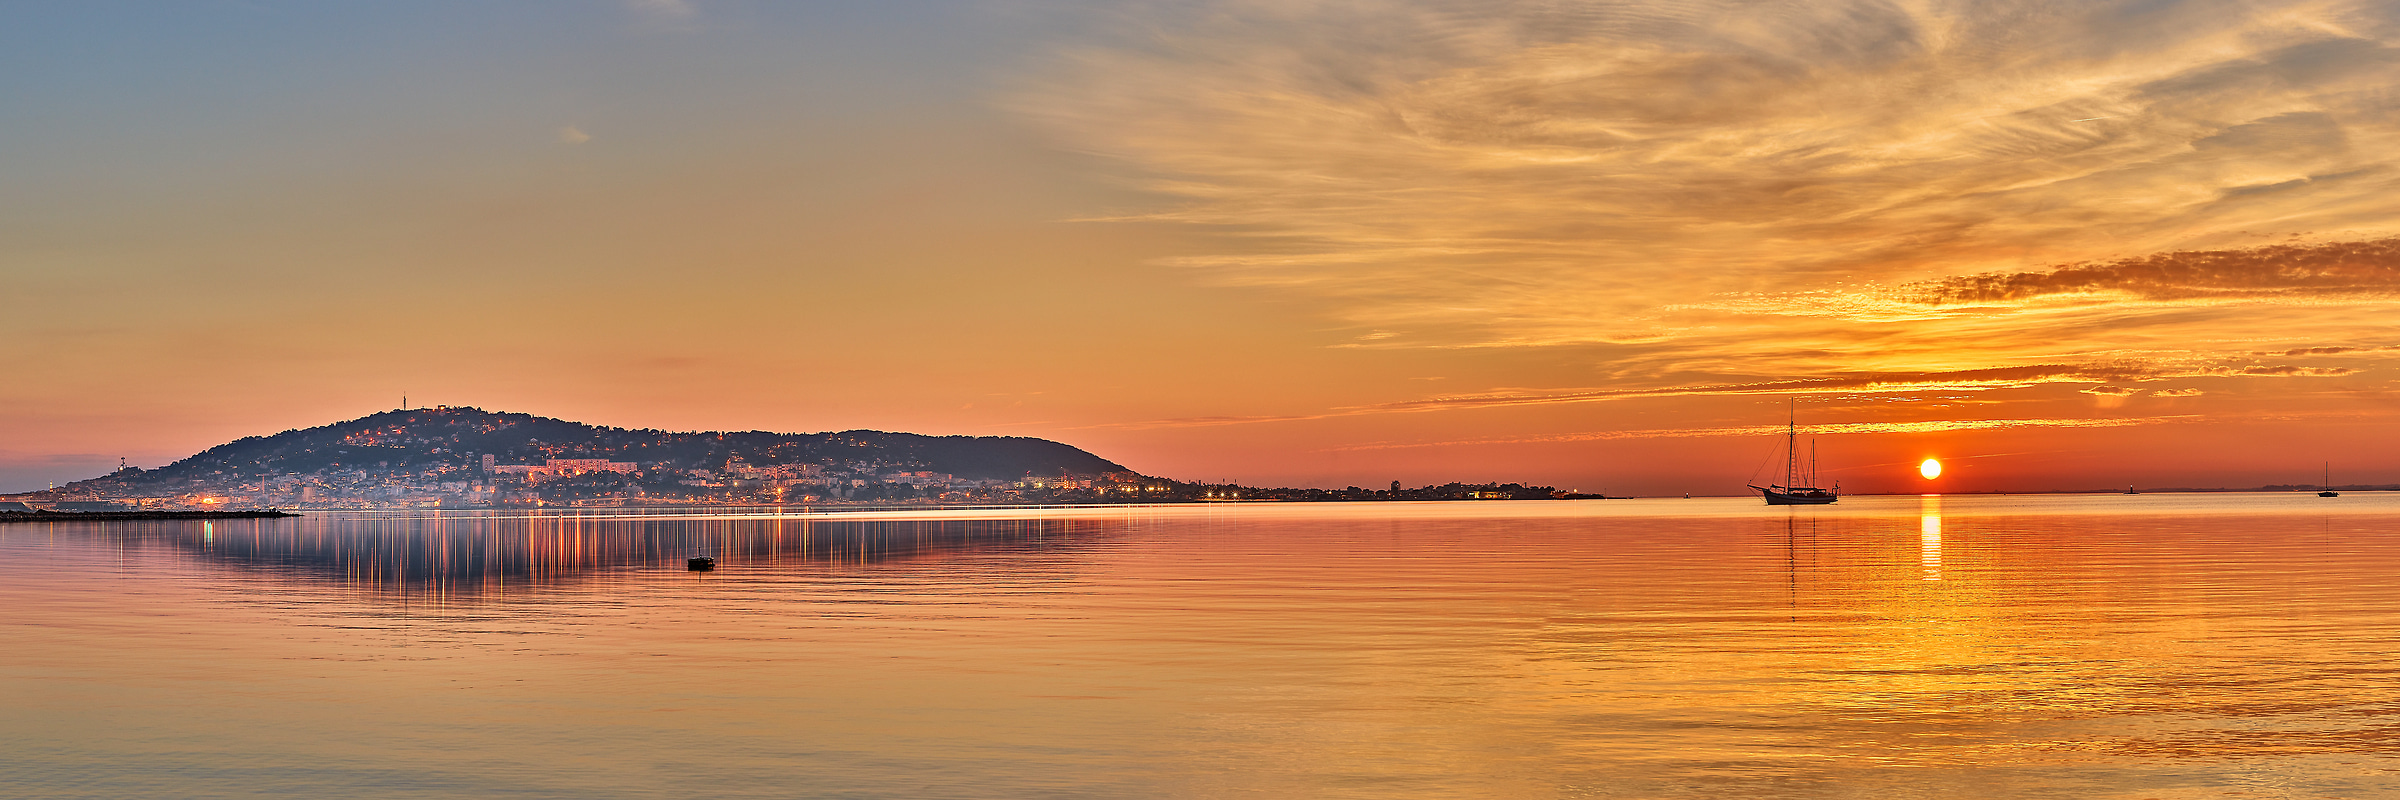 127 megapixels! A very high resolution, large-format VAST photo print of a sailboat on the water in front of a beautiful sunset; photograph created by David Meaux in l'Étang de Thau, Balaruc-les-Bains, l'Hérault, France